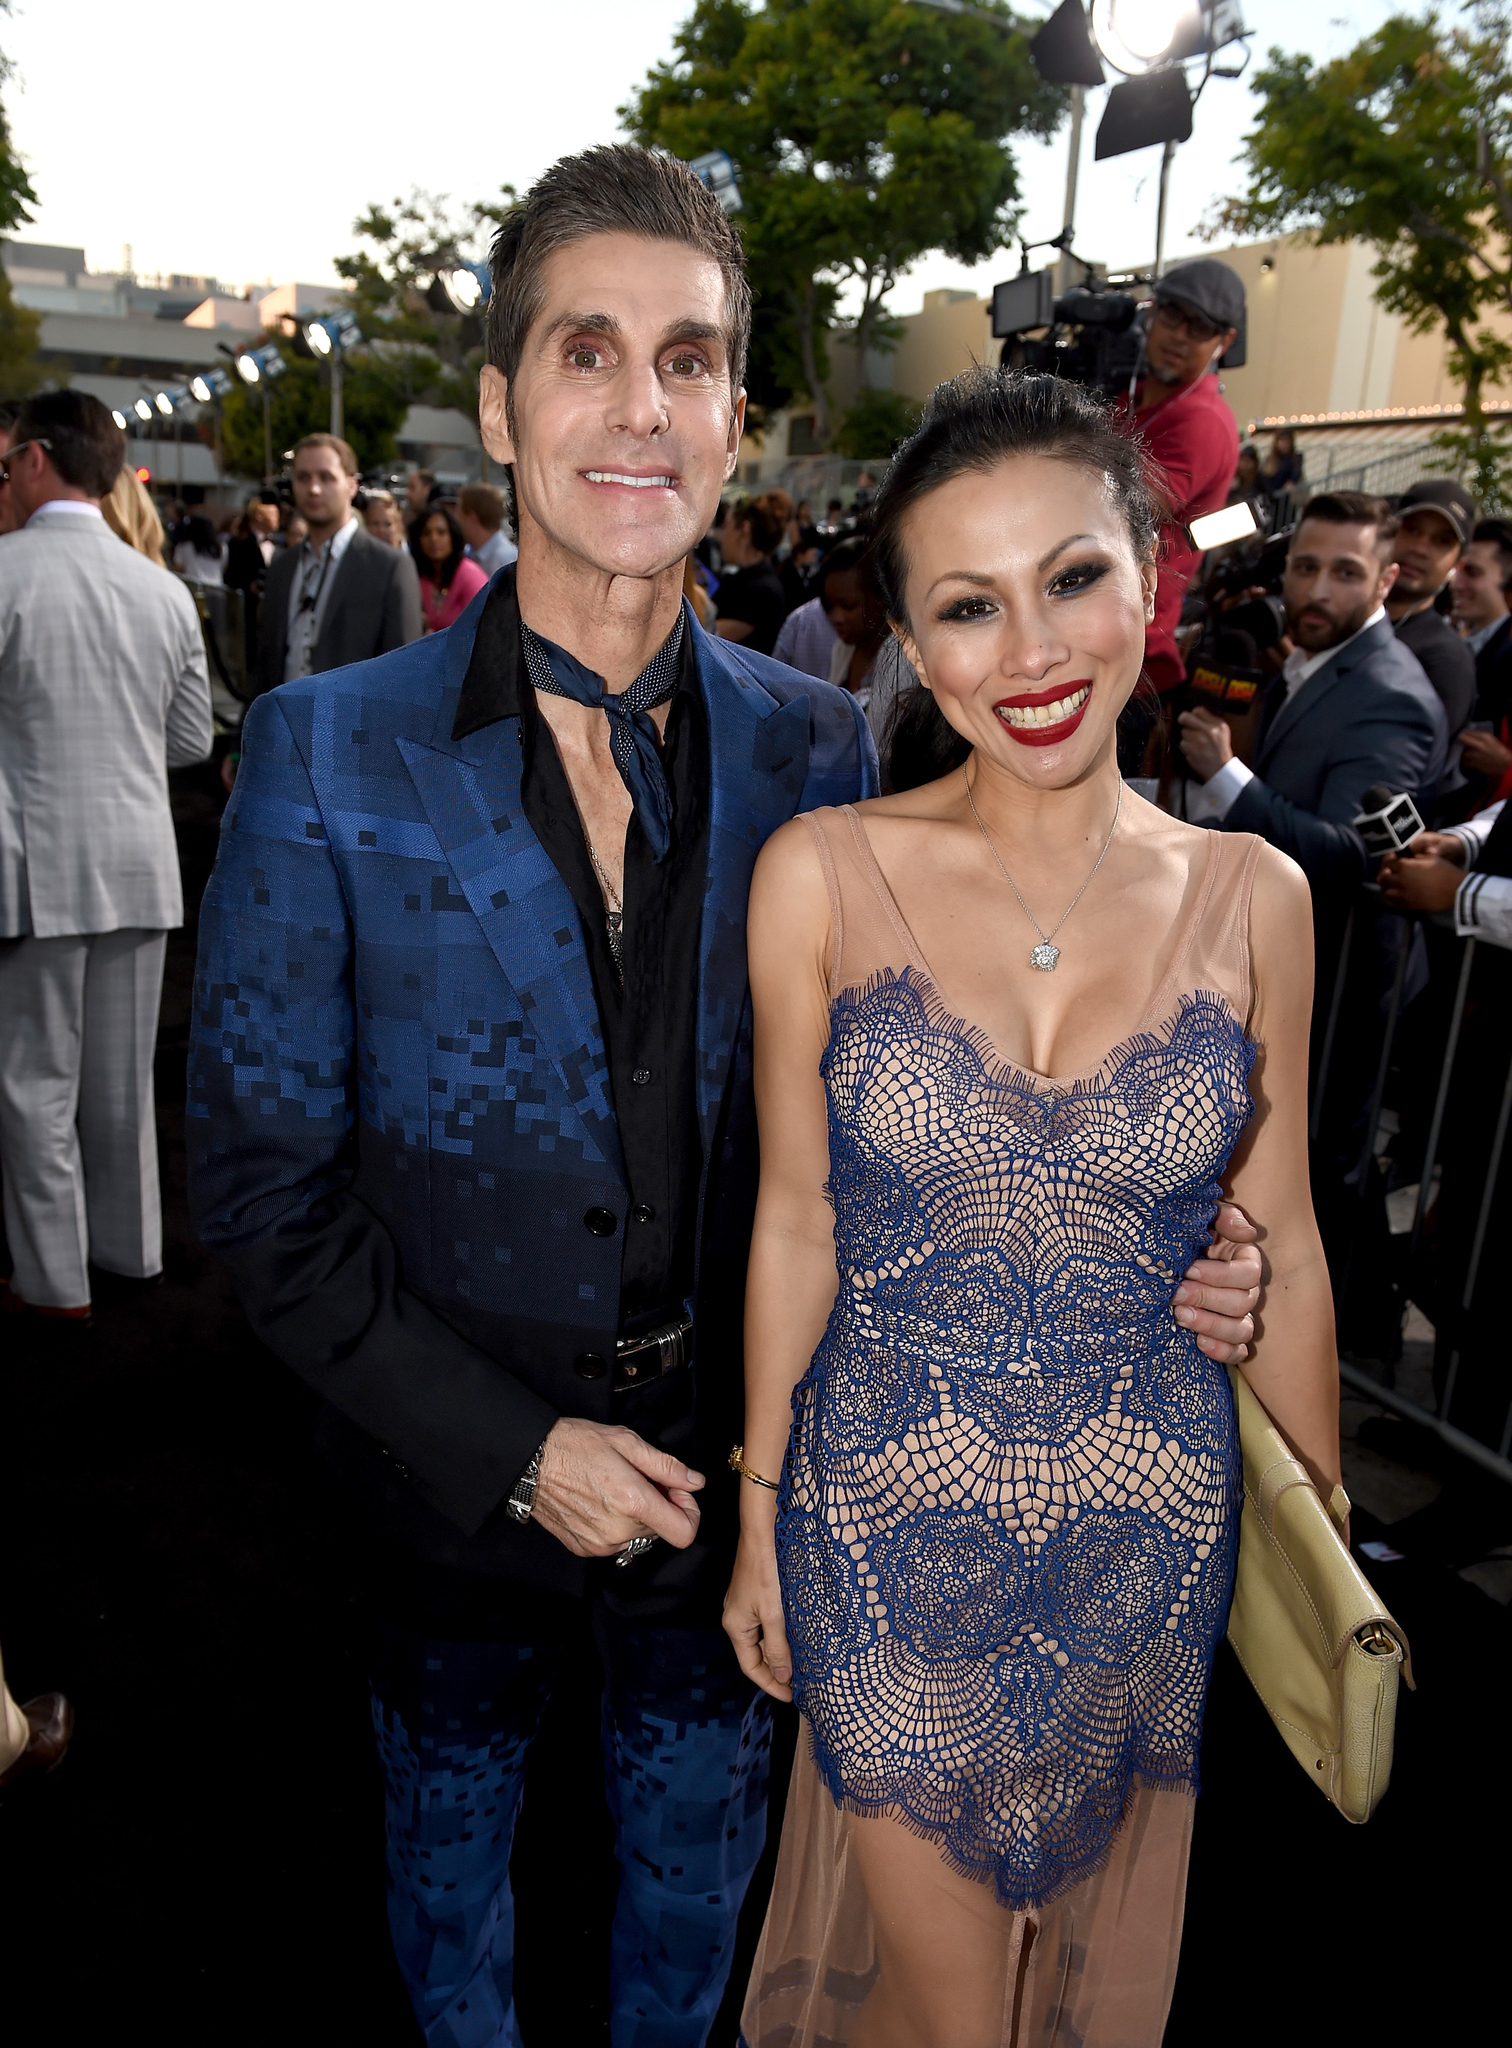 Perry Farrell and Etty Lau at event of Entourage (2015)